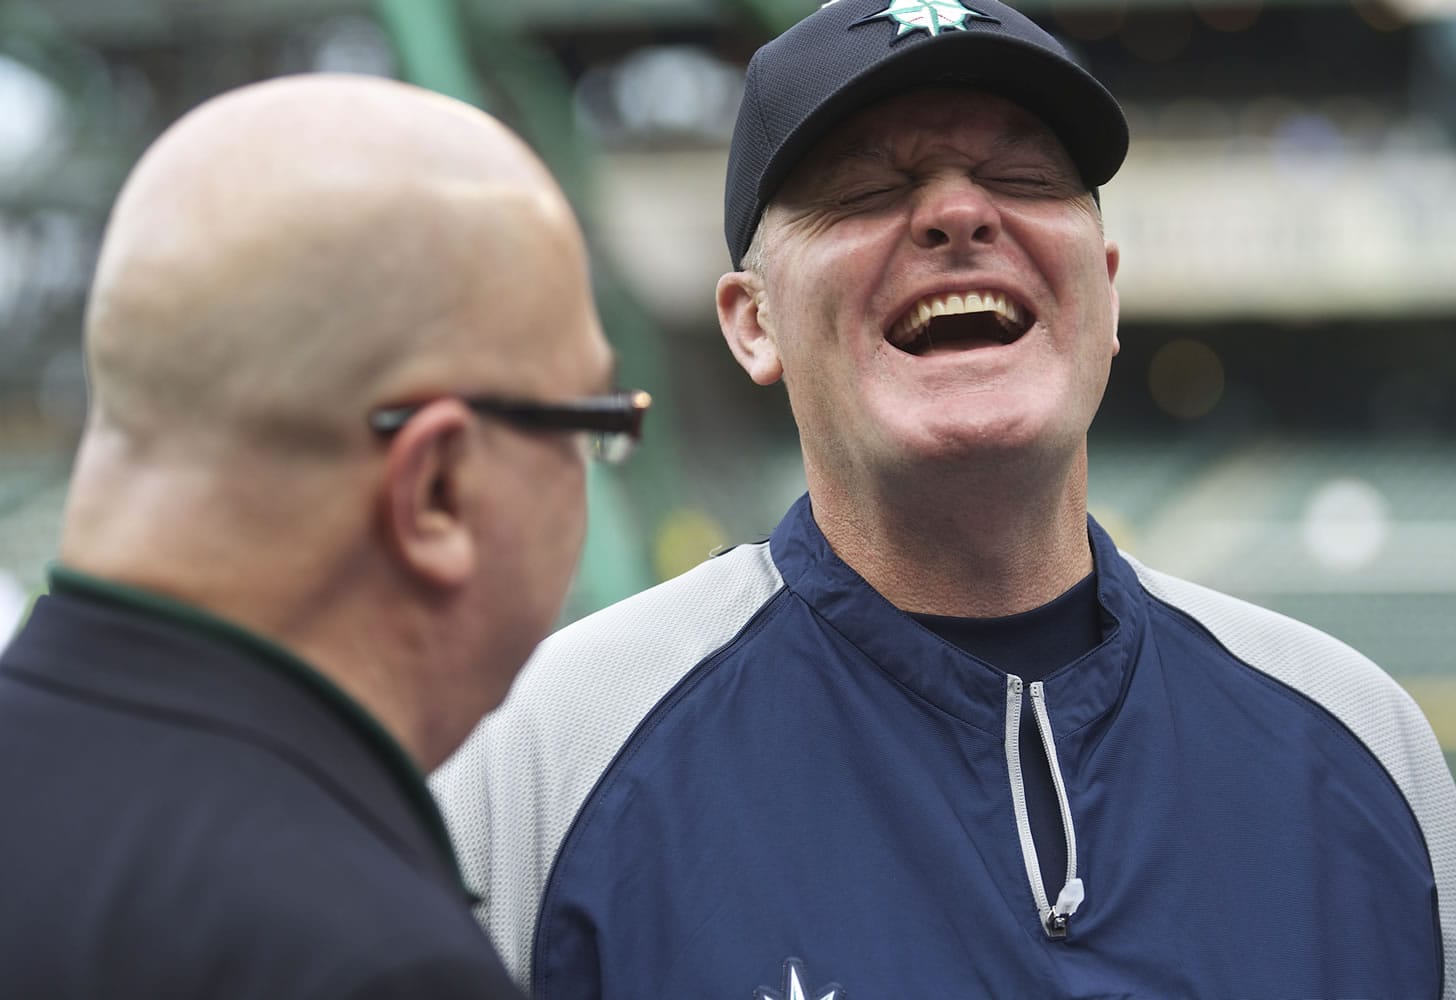 Seattle Mariners manager Eric Wedge, right, laughs while talking with general manager Jack Zduriencik before the Friday's game against the Los Angeles Angels.